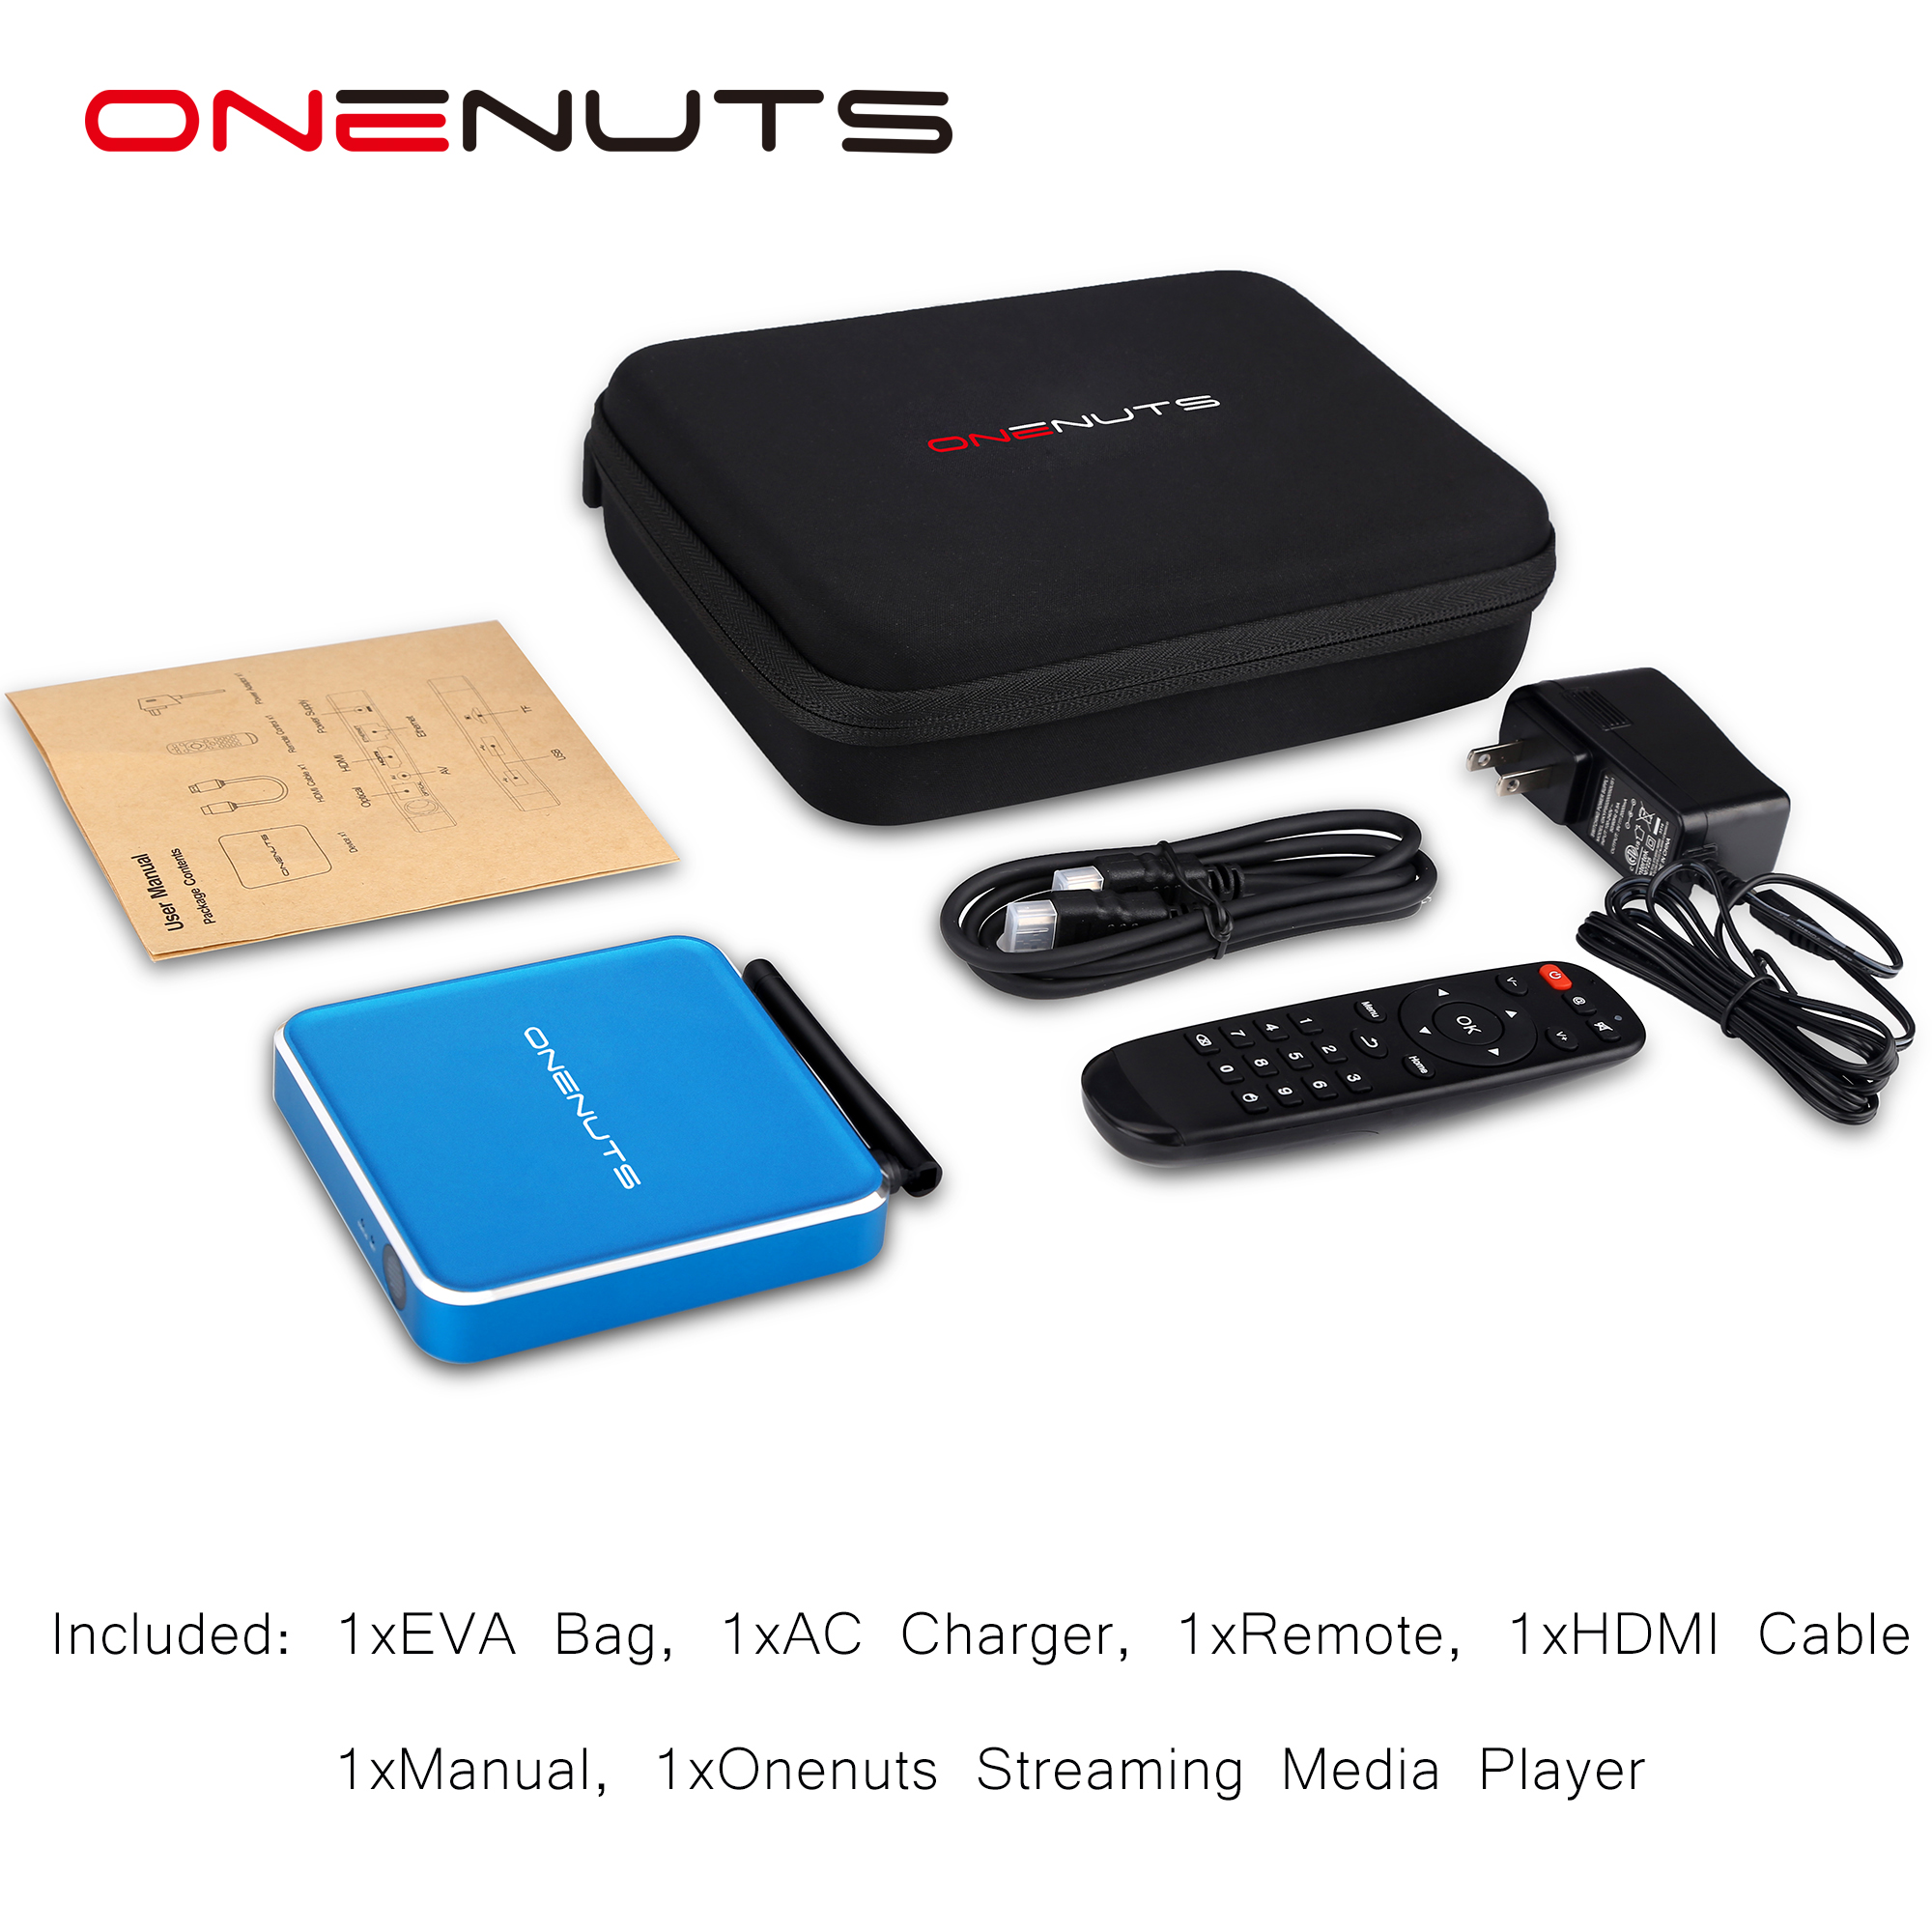 Android TV Box Manufacturer Streaming TV Box Manufacturer Android IPTV Box in China